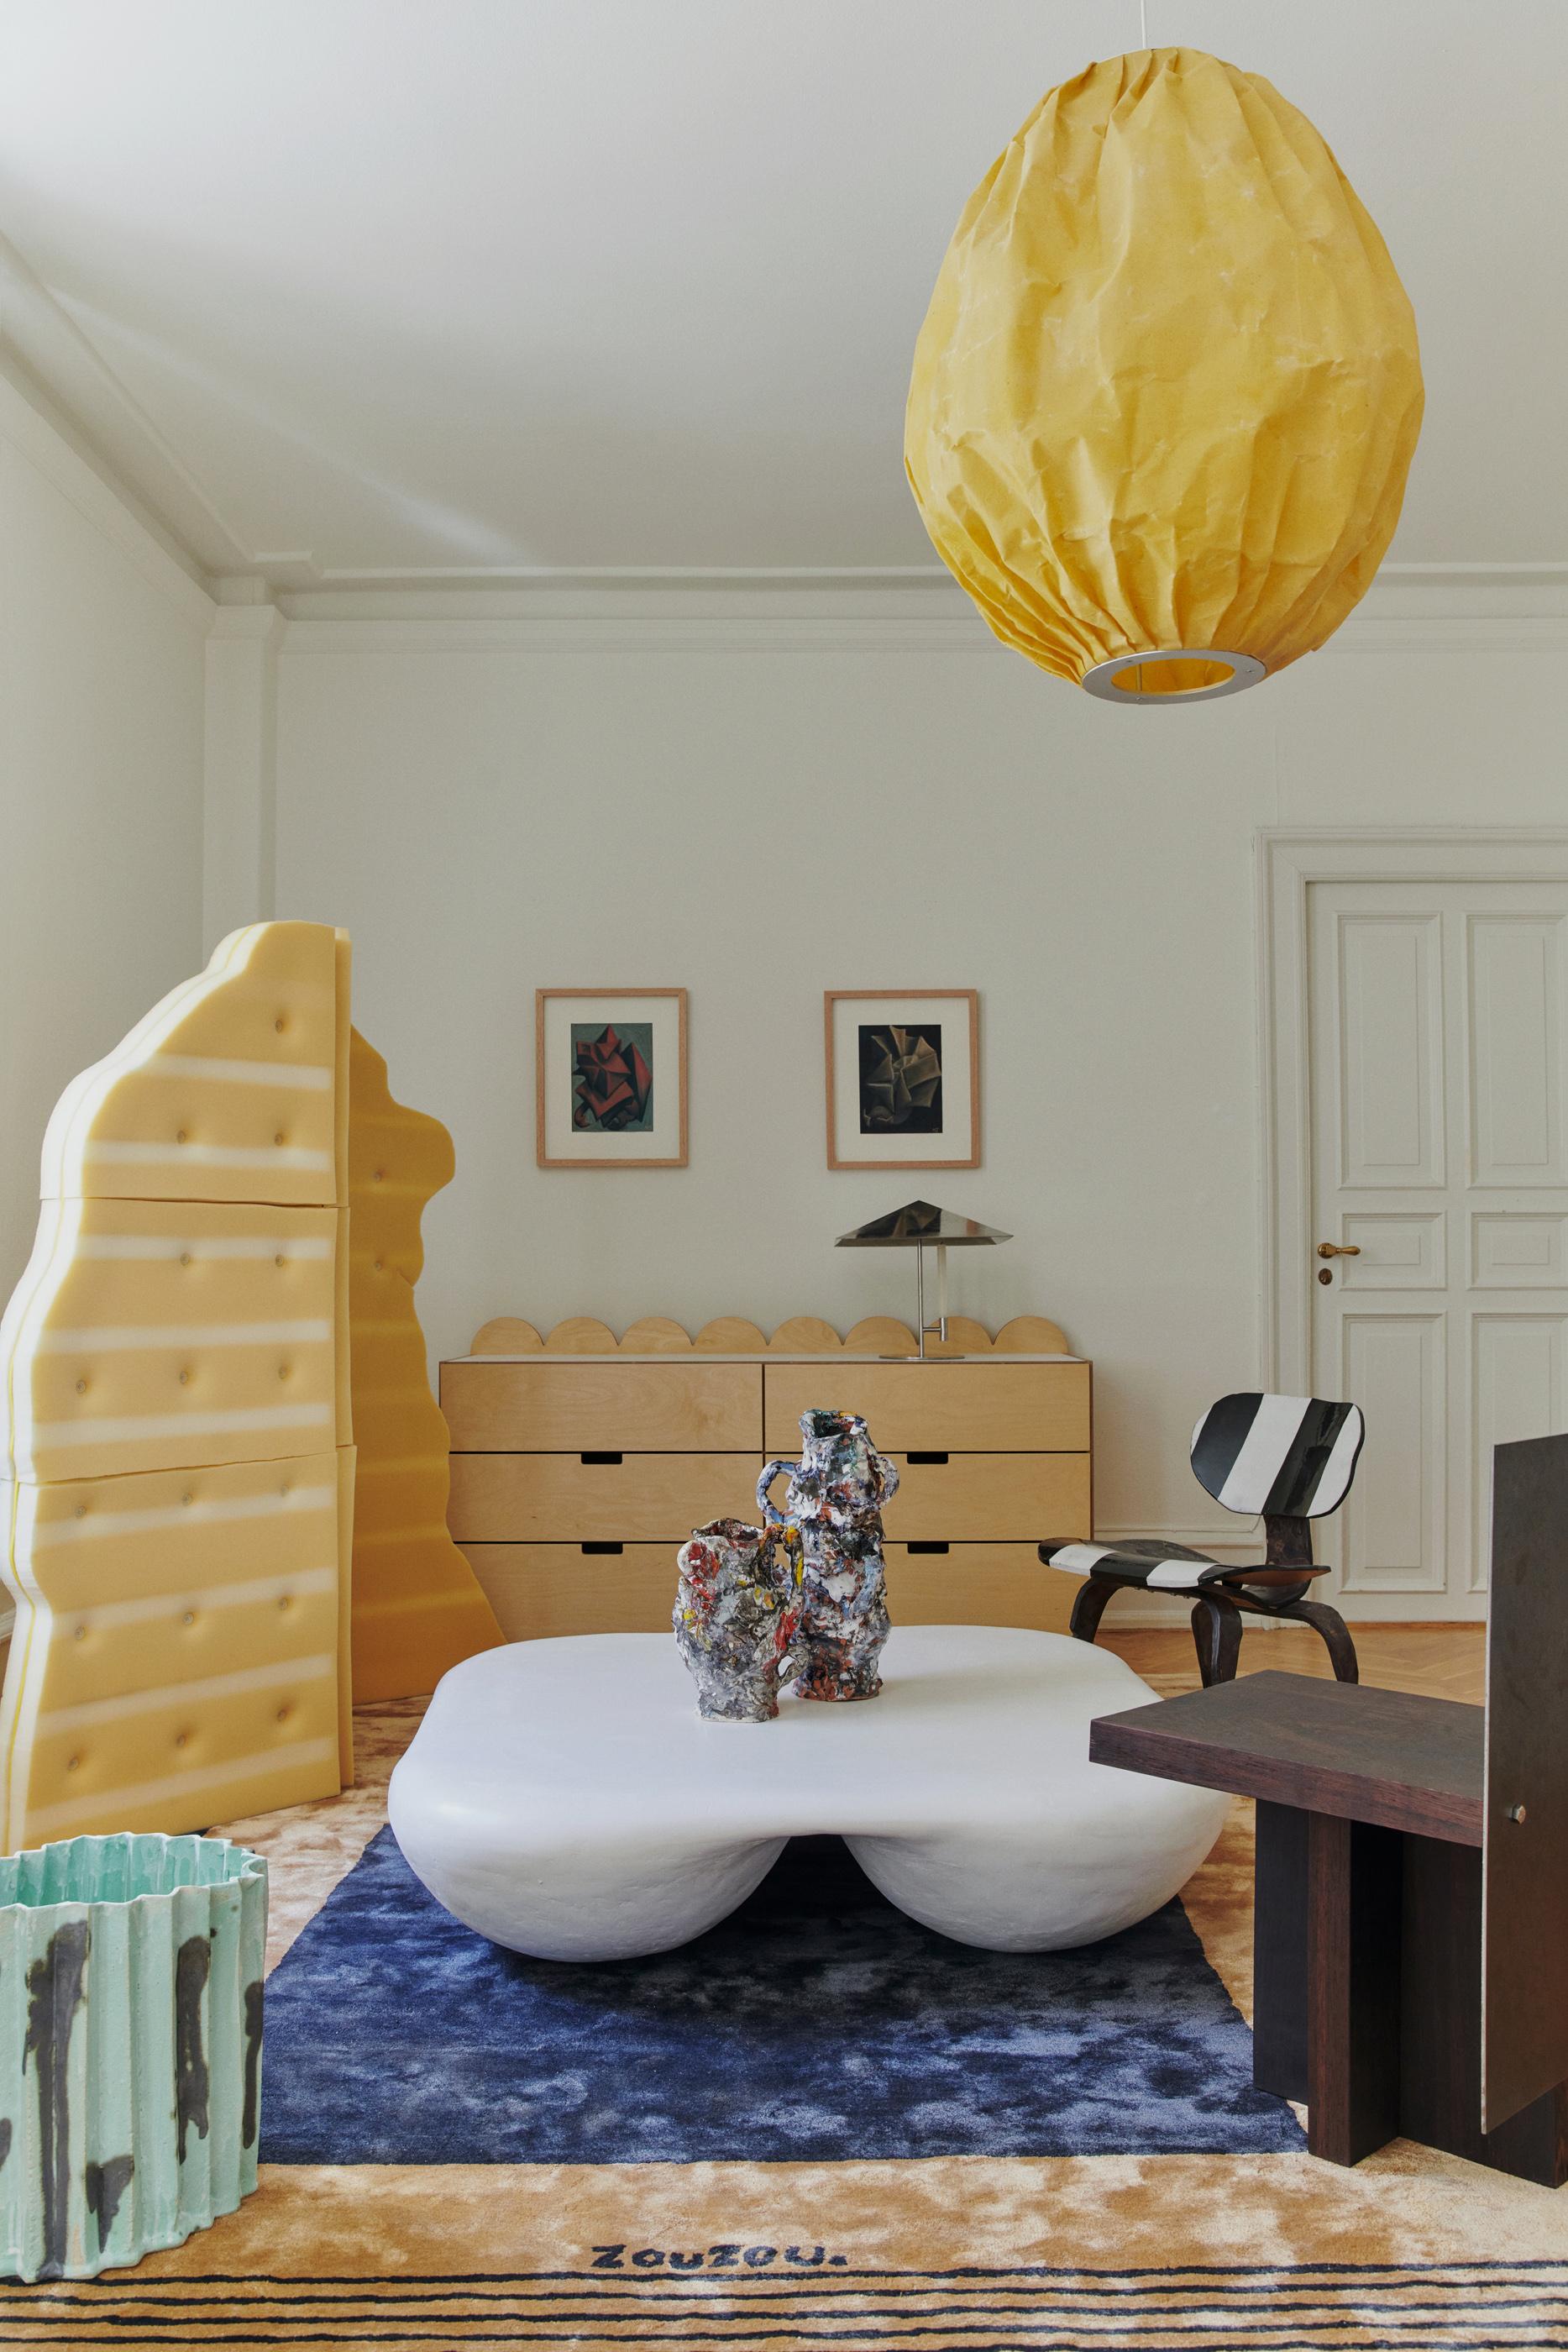 Beeswax is a pendant light sculpture for double-height ceilings by Pablo Bolumar. Made of beeswaxed canvas, the lampshade generates a warm textured light, accentuating the pleats and wrinkles of the making. The hanging artwork carries a subtle scent